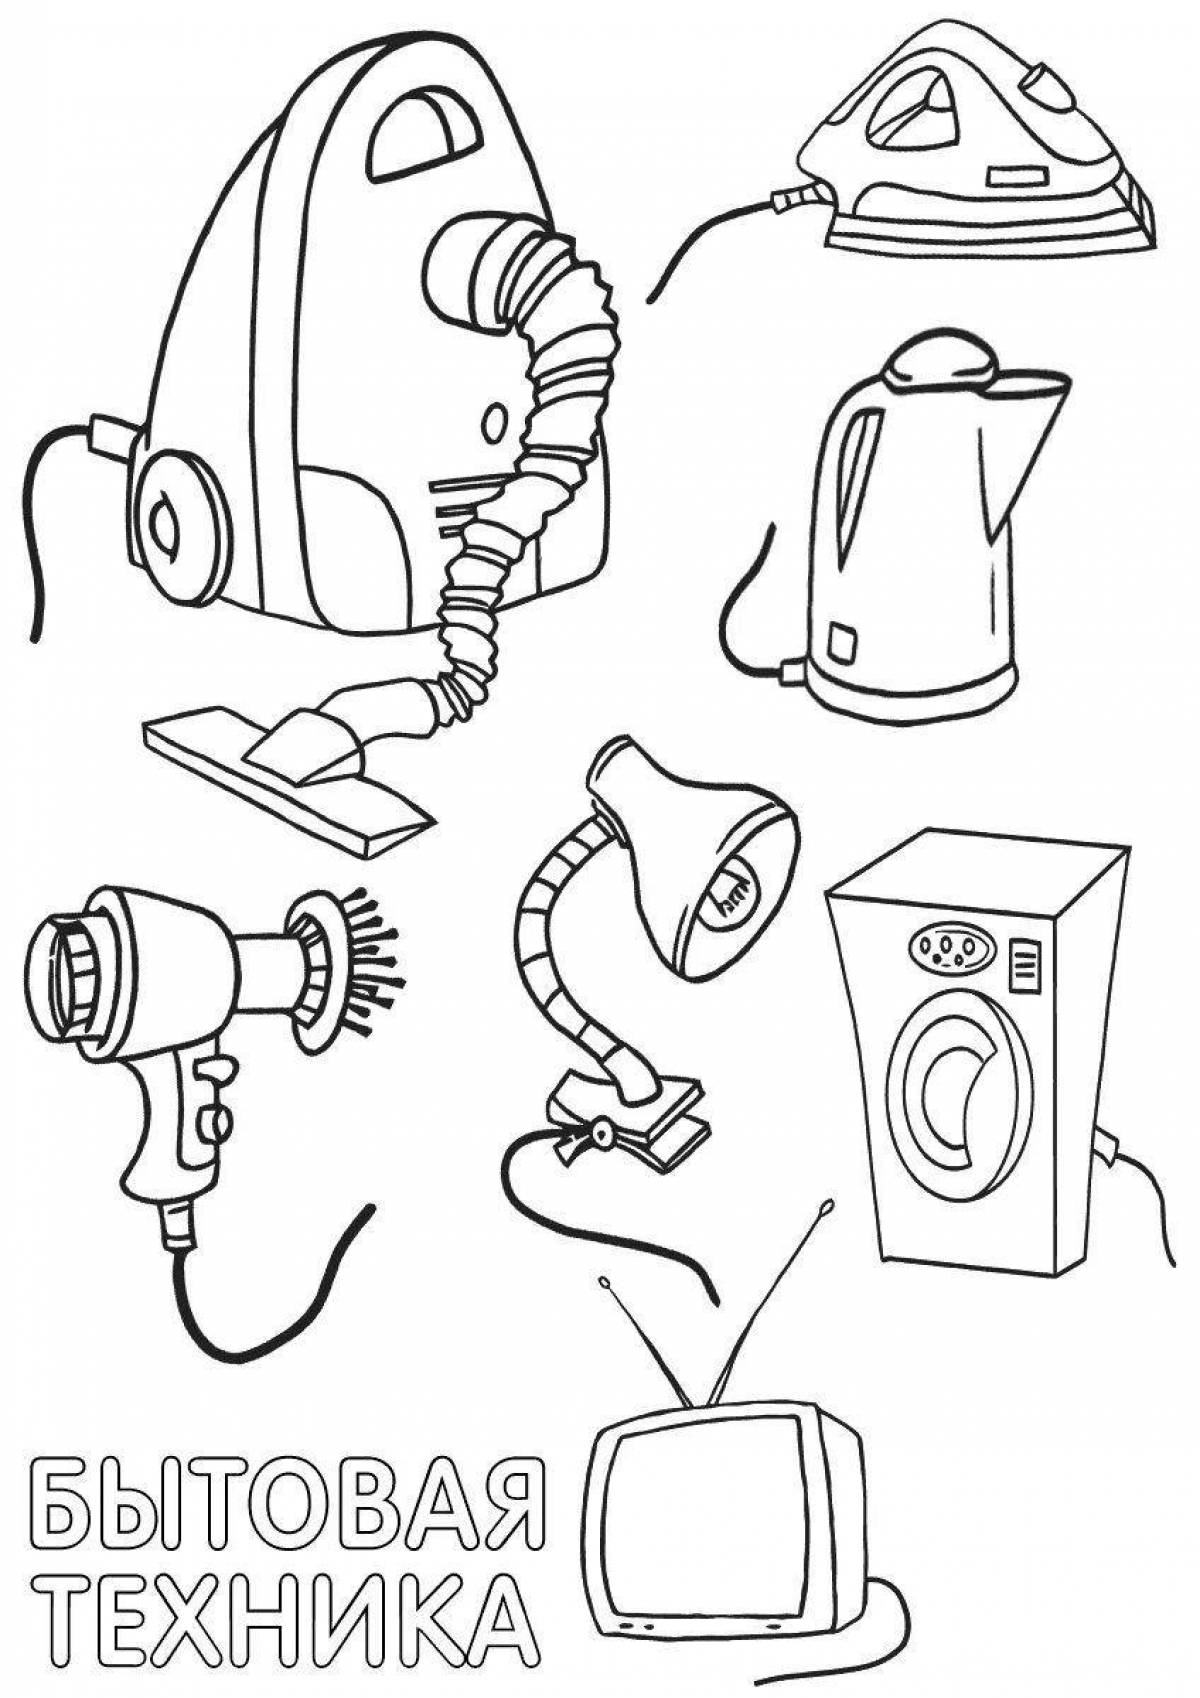 Fun coloring page for household items